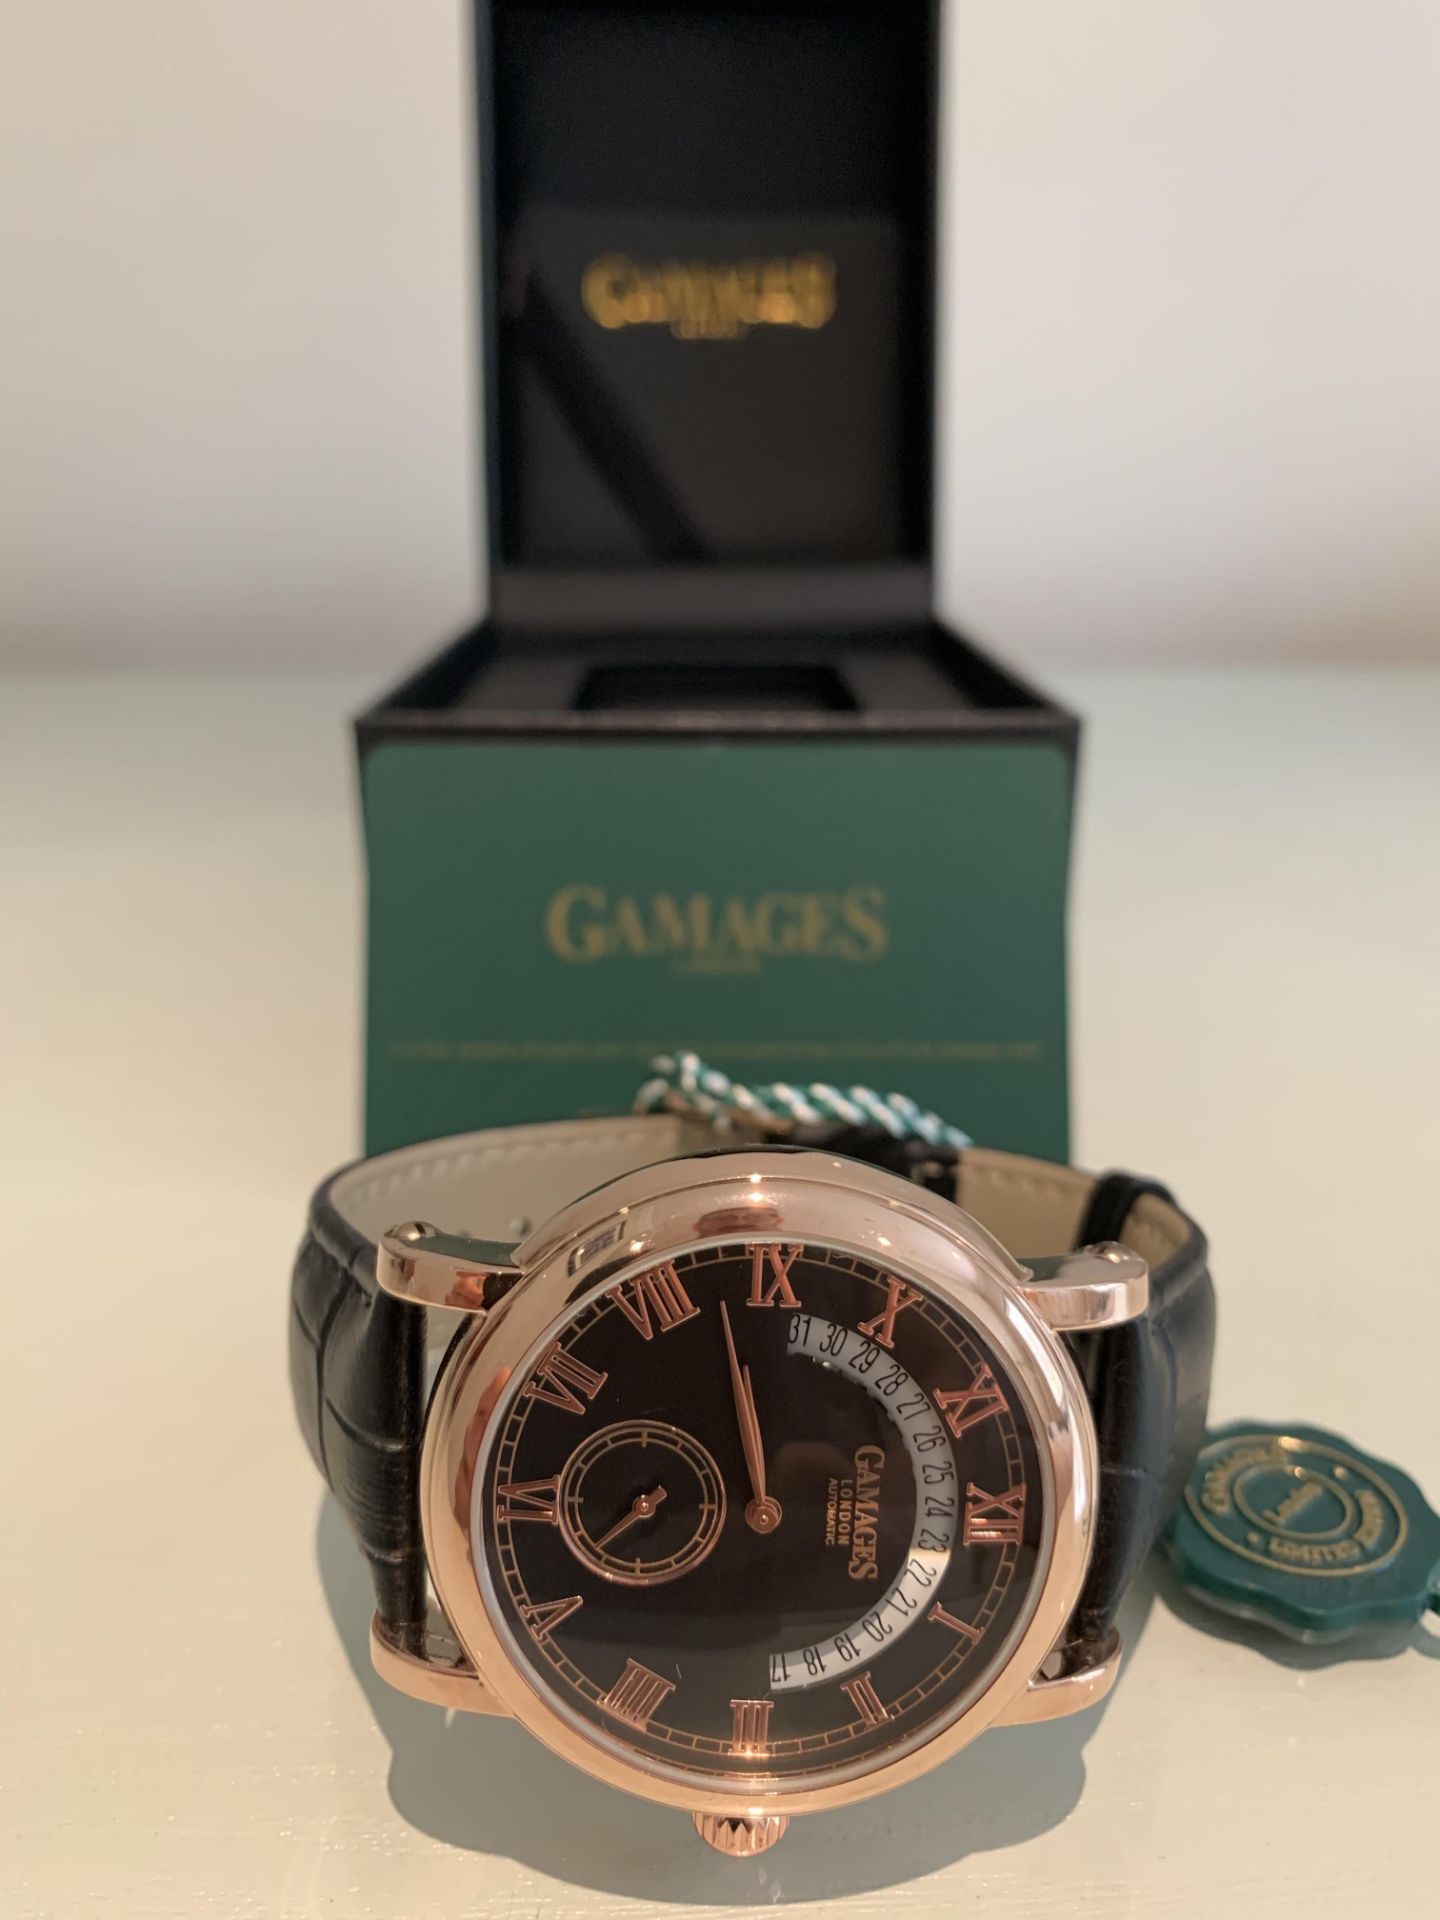 Limited Edition Hand Assembled GAMAGES Split Date Automatic Rose – 5 Year Warranty & Free Delivery